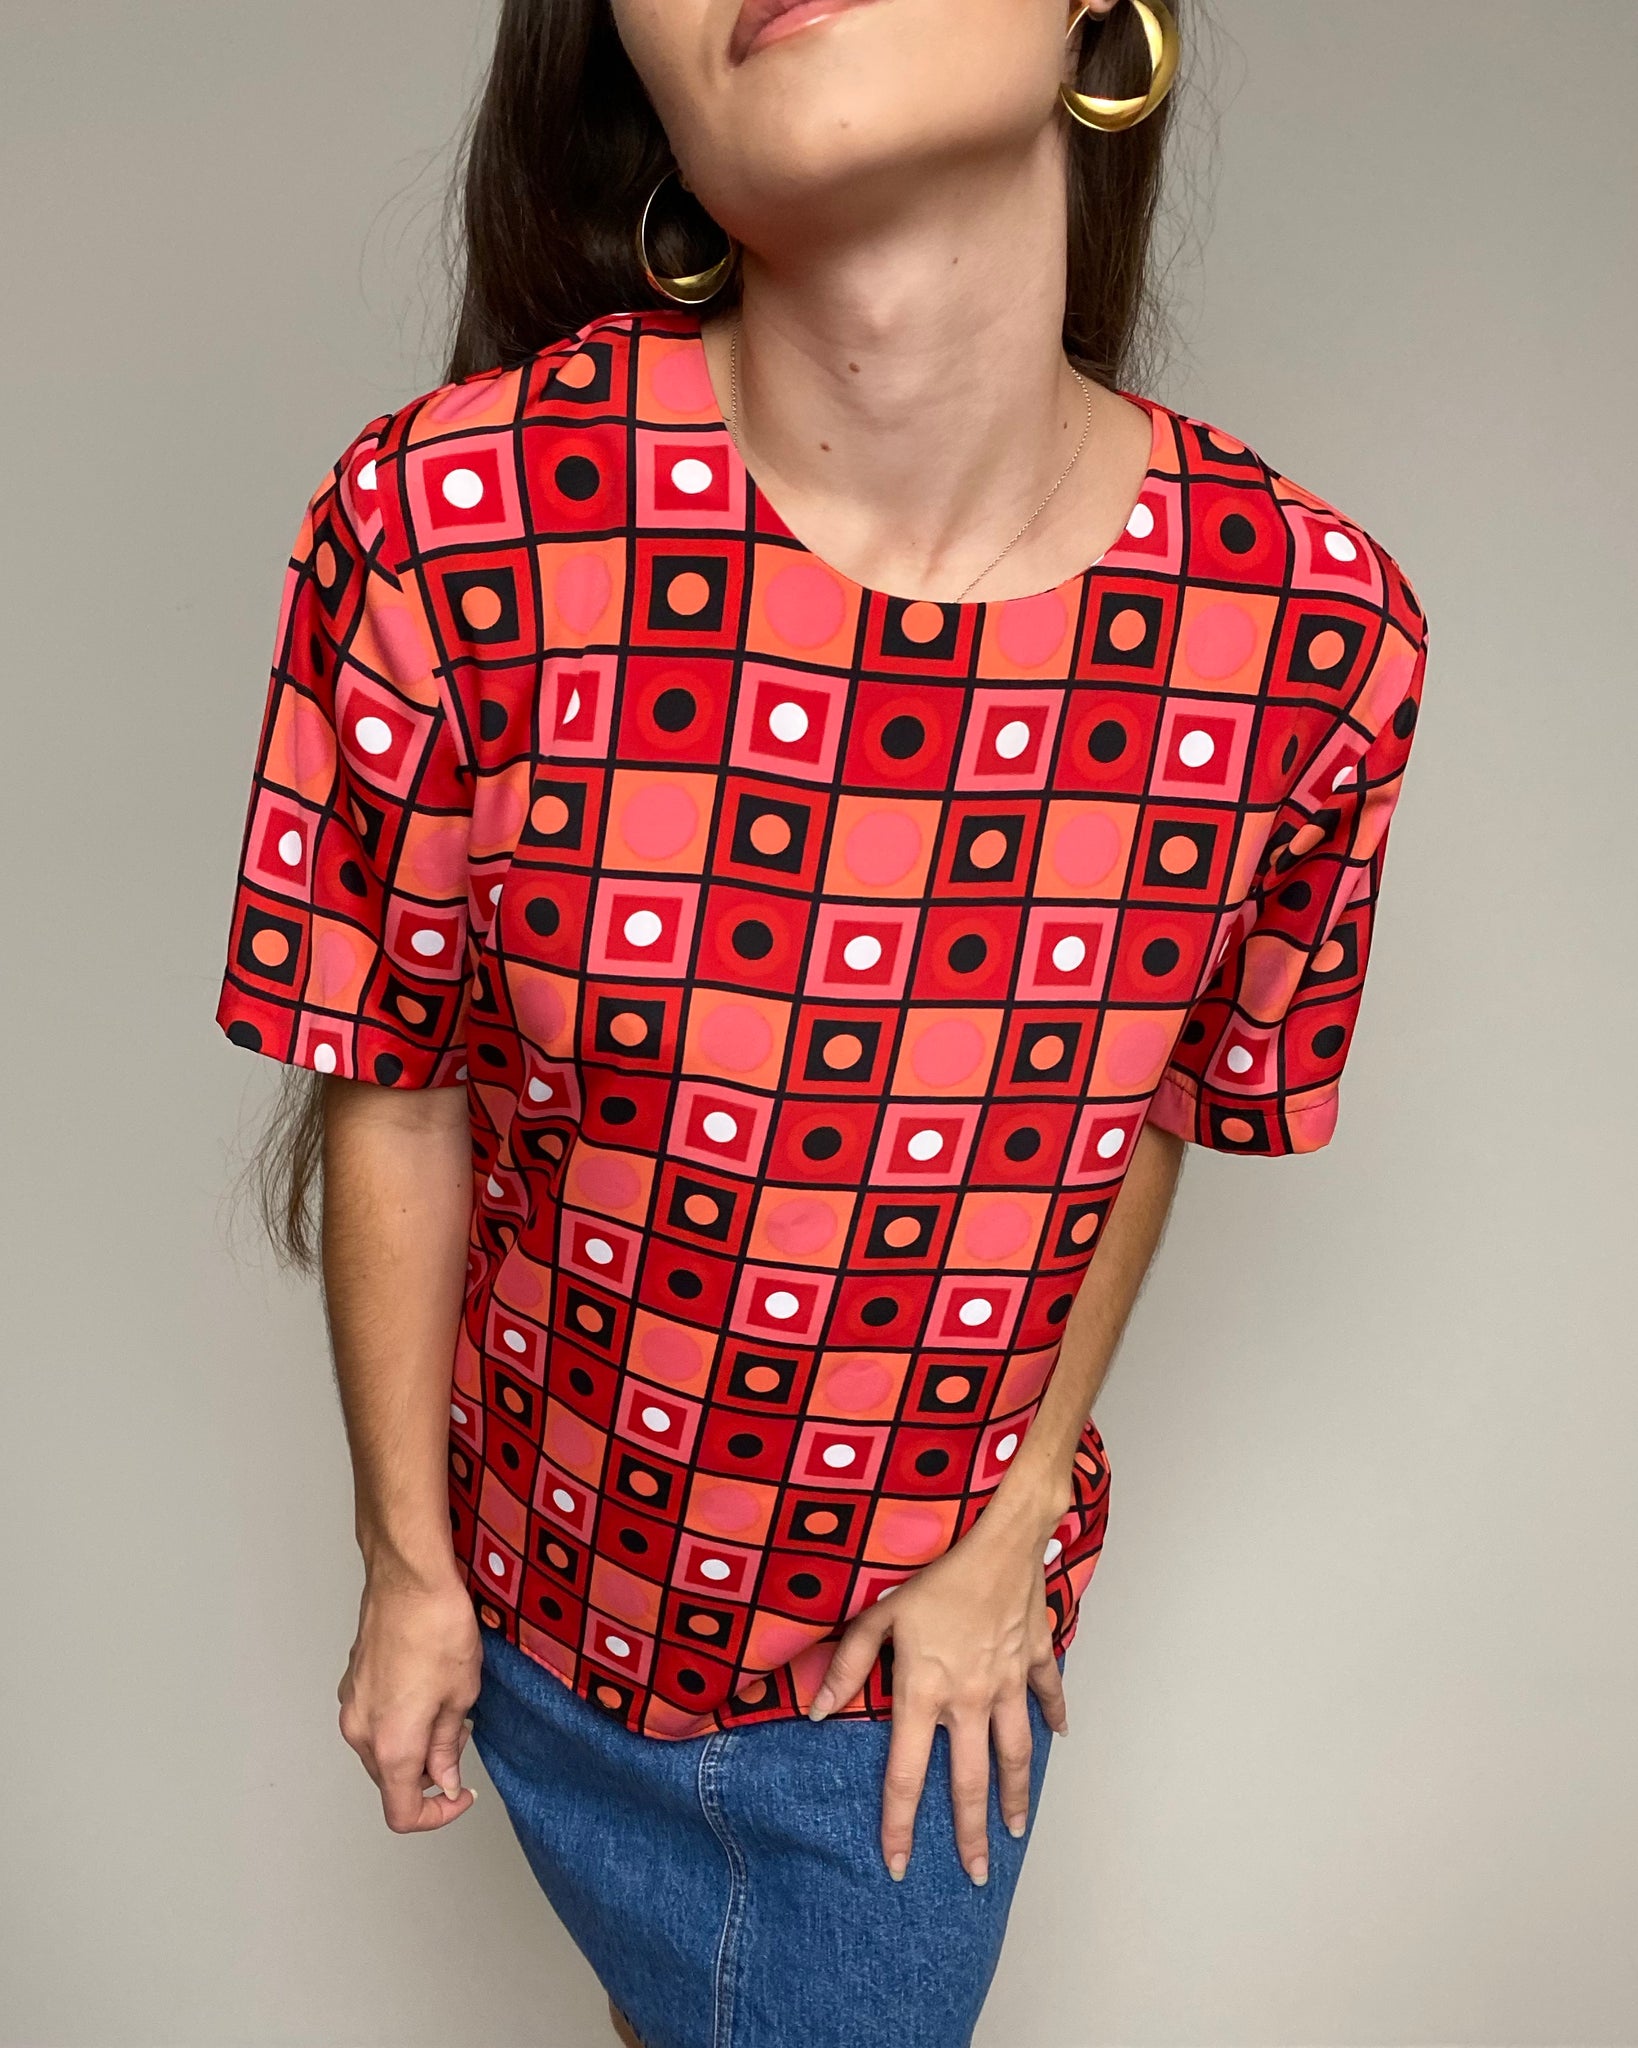 90s Square Blouse (fits S/M)